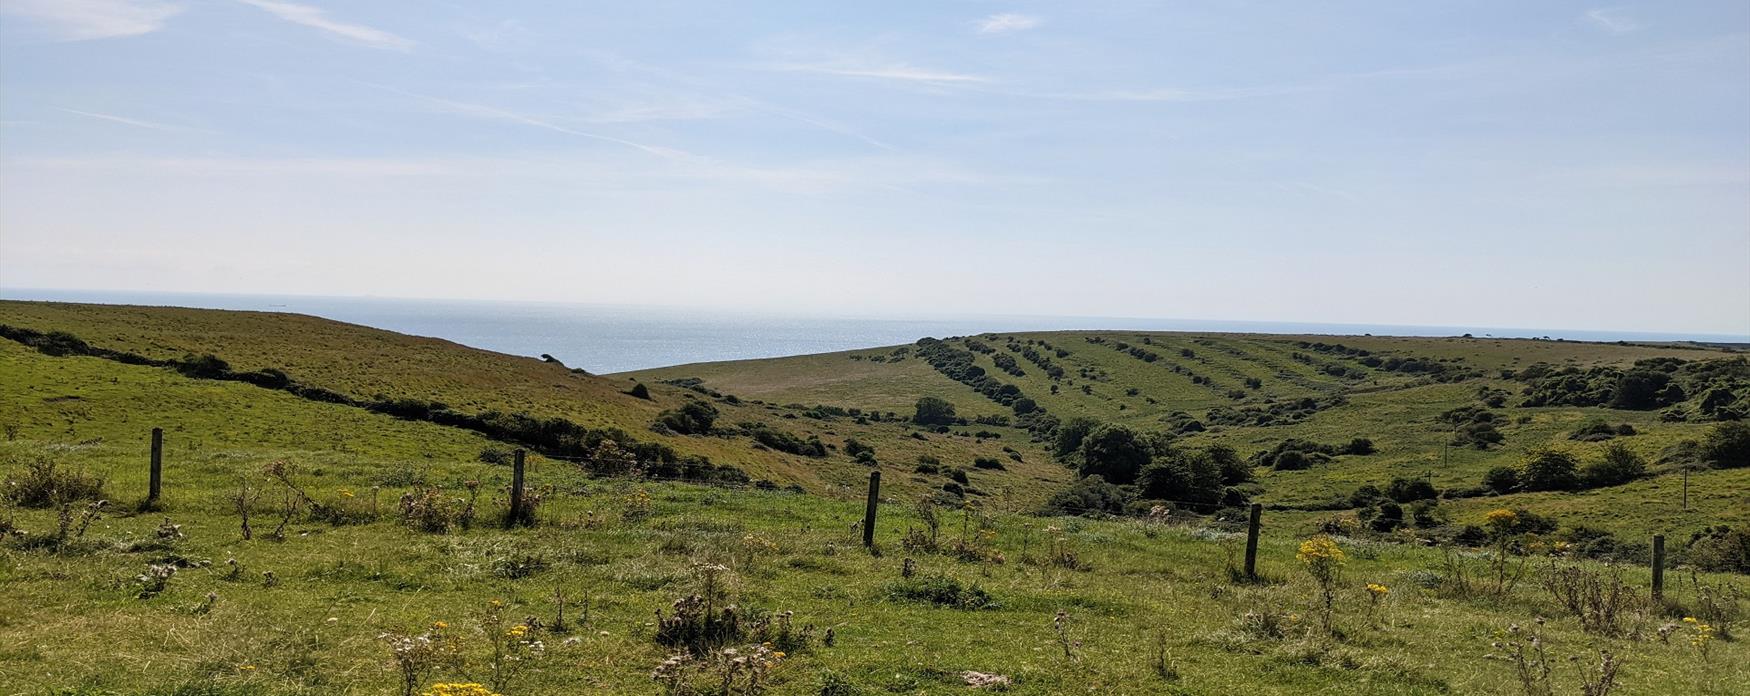 The grassy, rolling hills of Worth Matravers, looking out to the sea in the far distance.